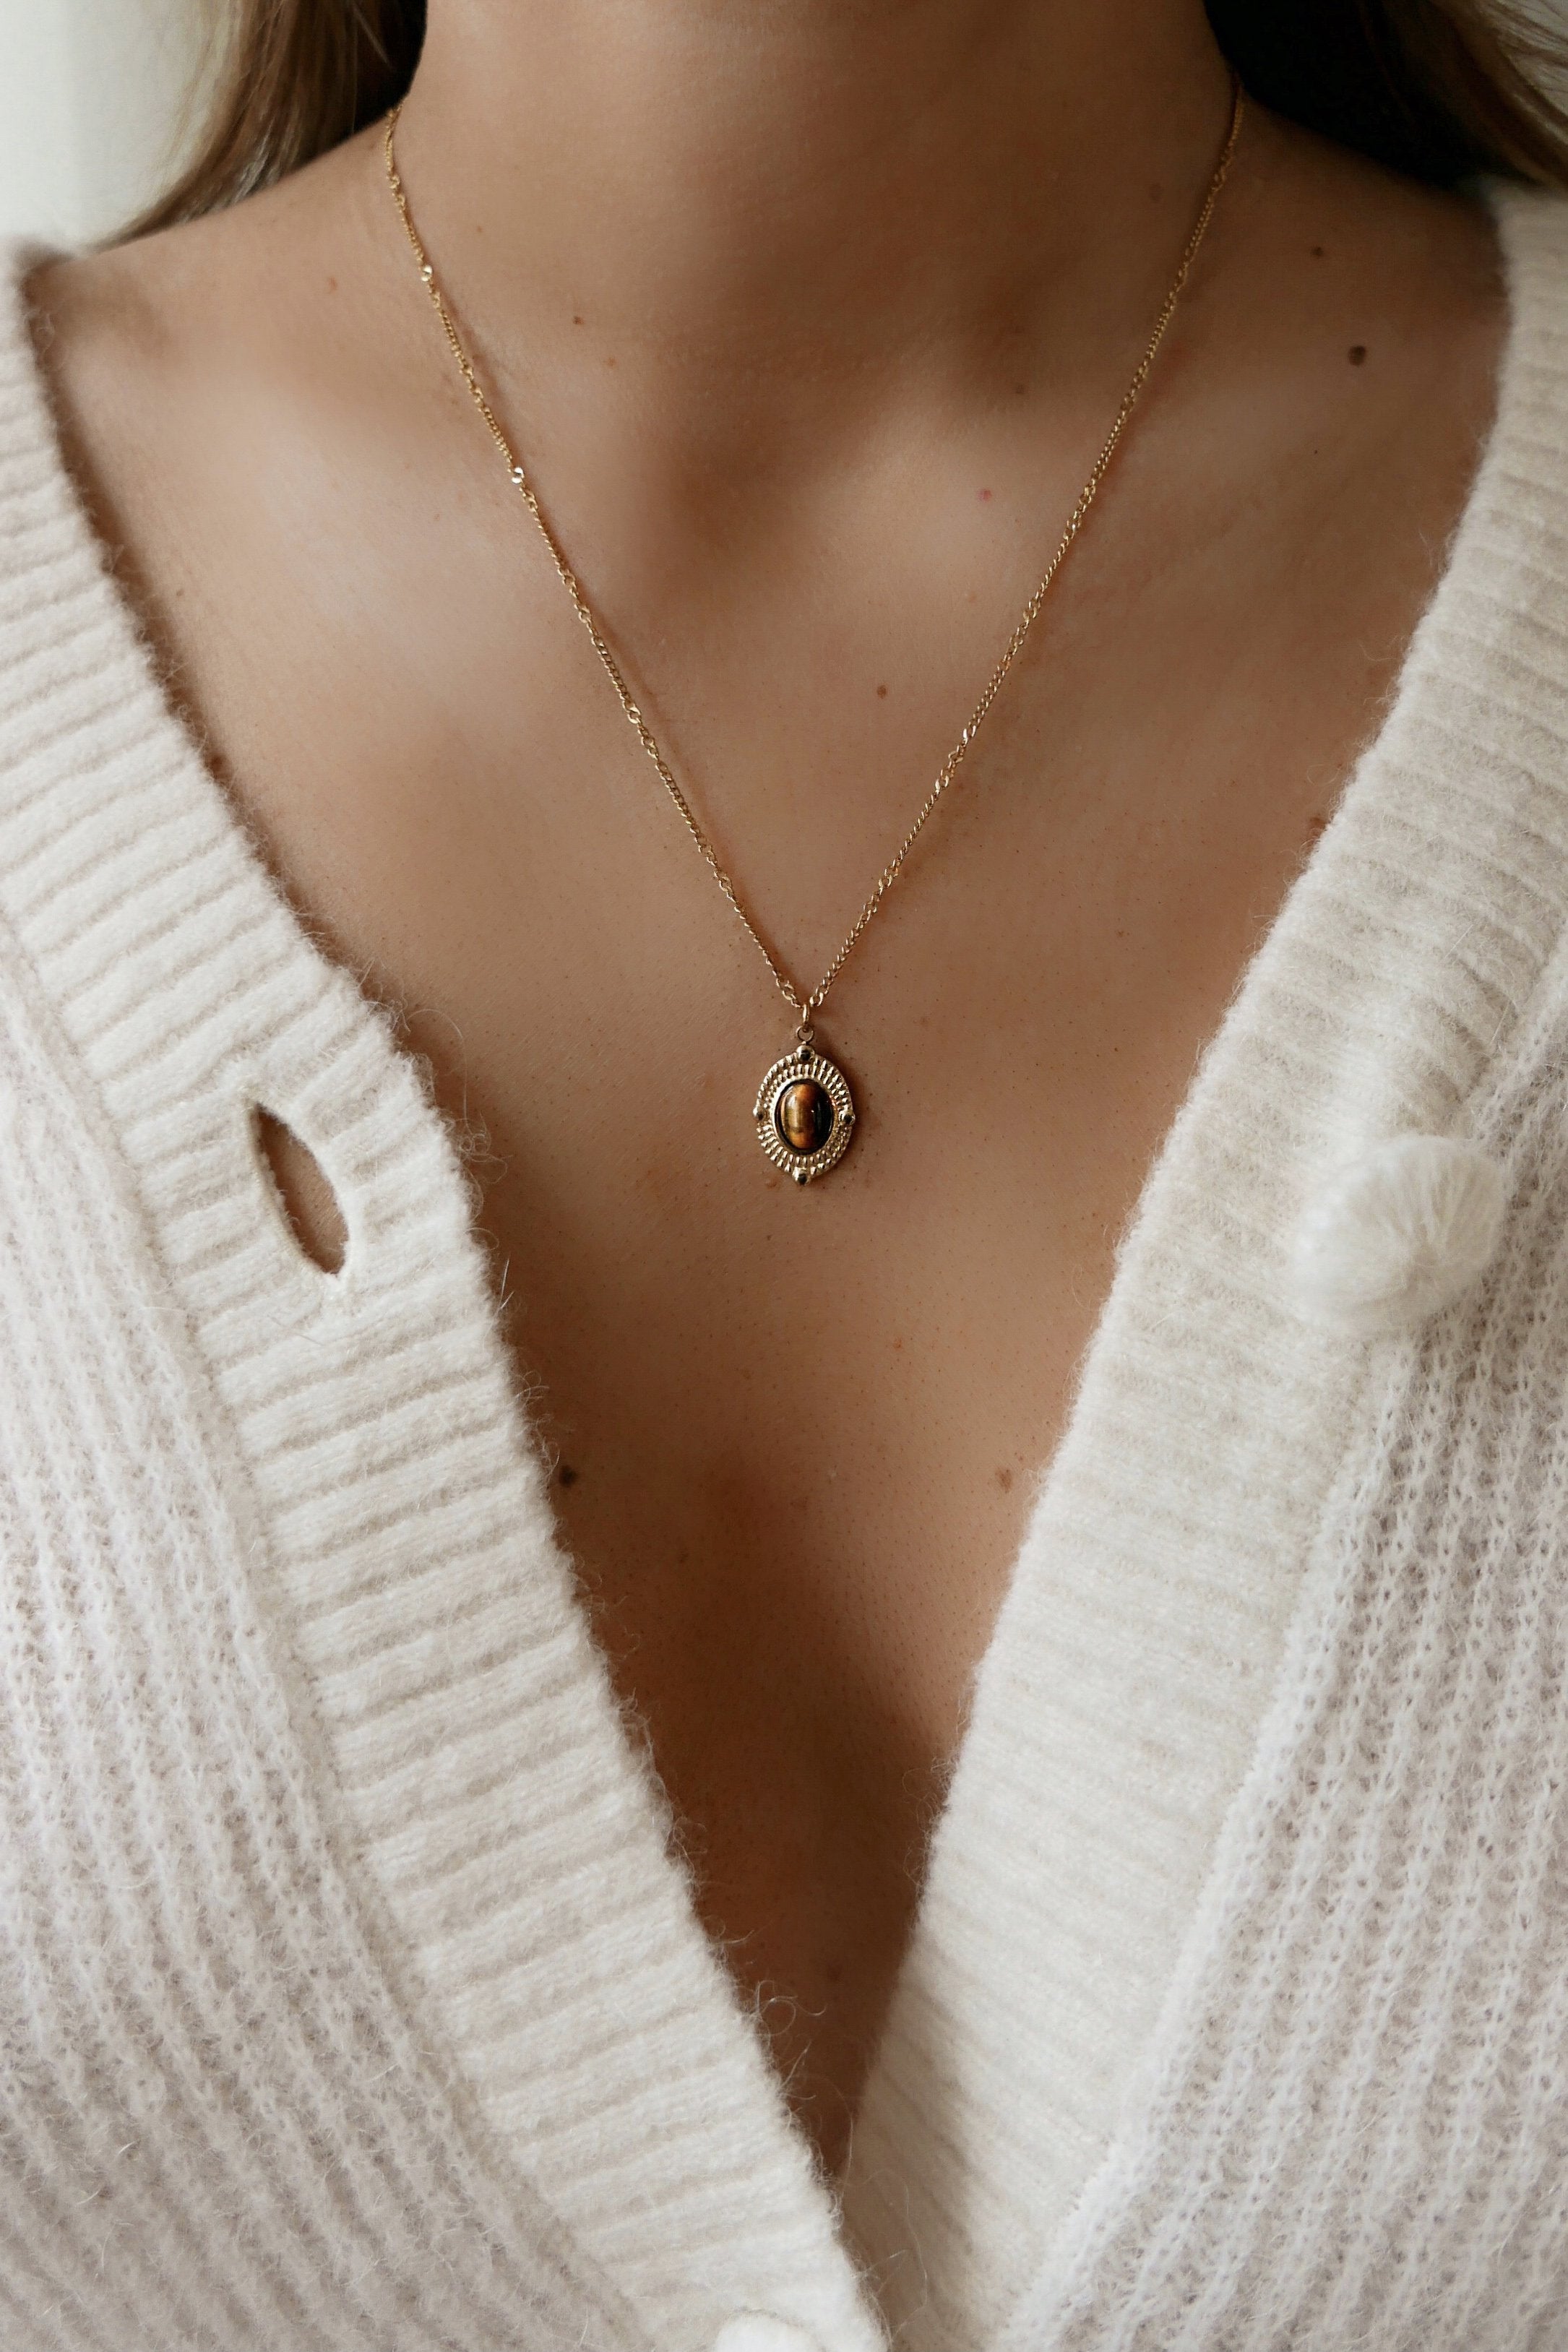 Beverly Necklace - Boutique Minimaliste has waterproof, durable, elegant and vintage inspired jewelry